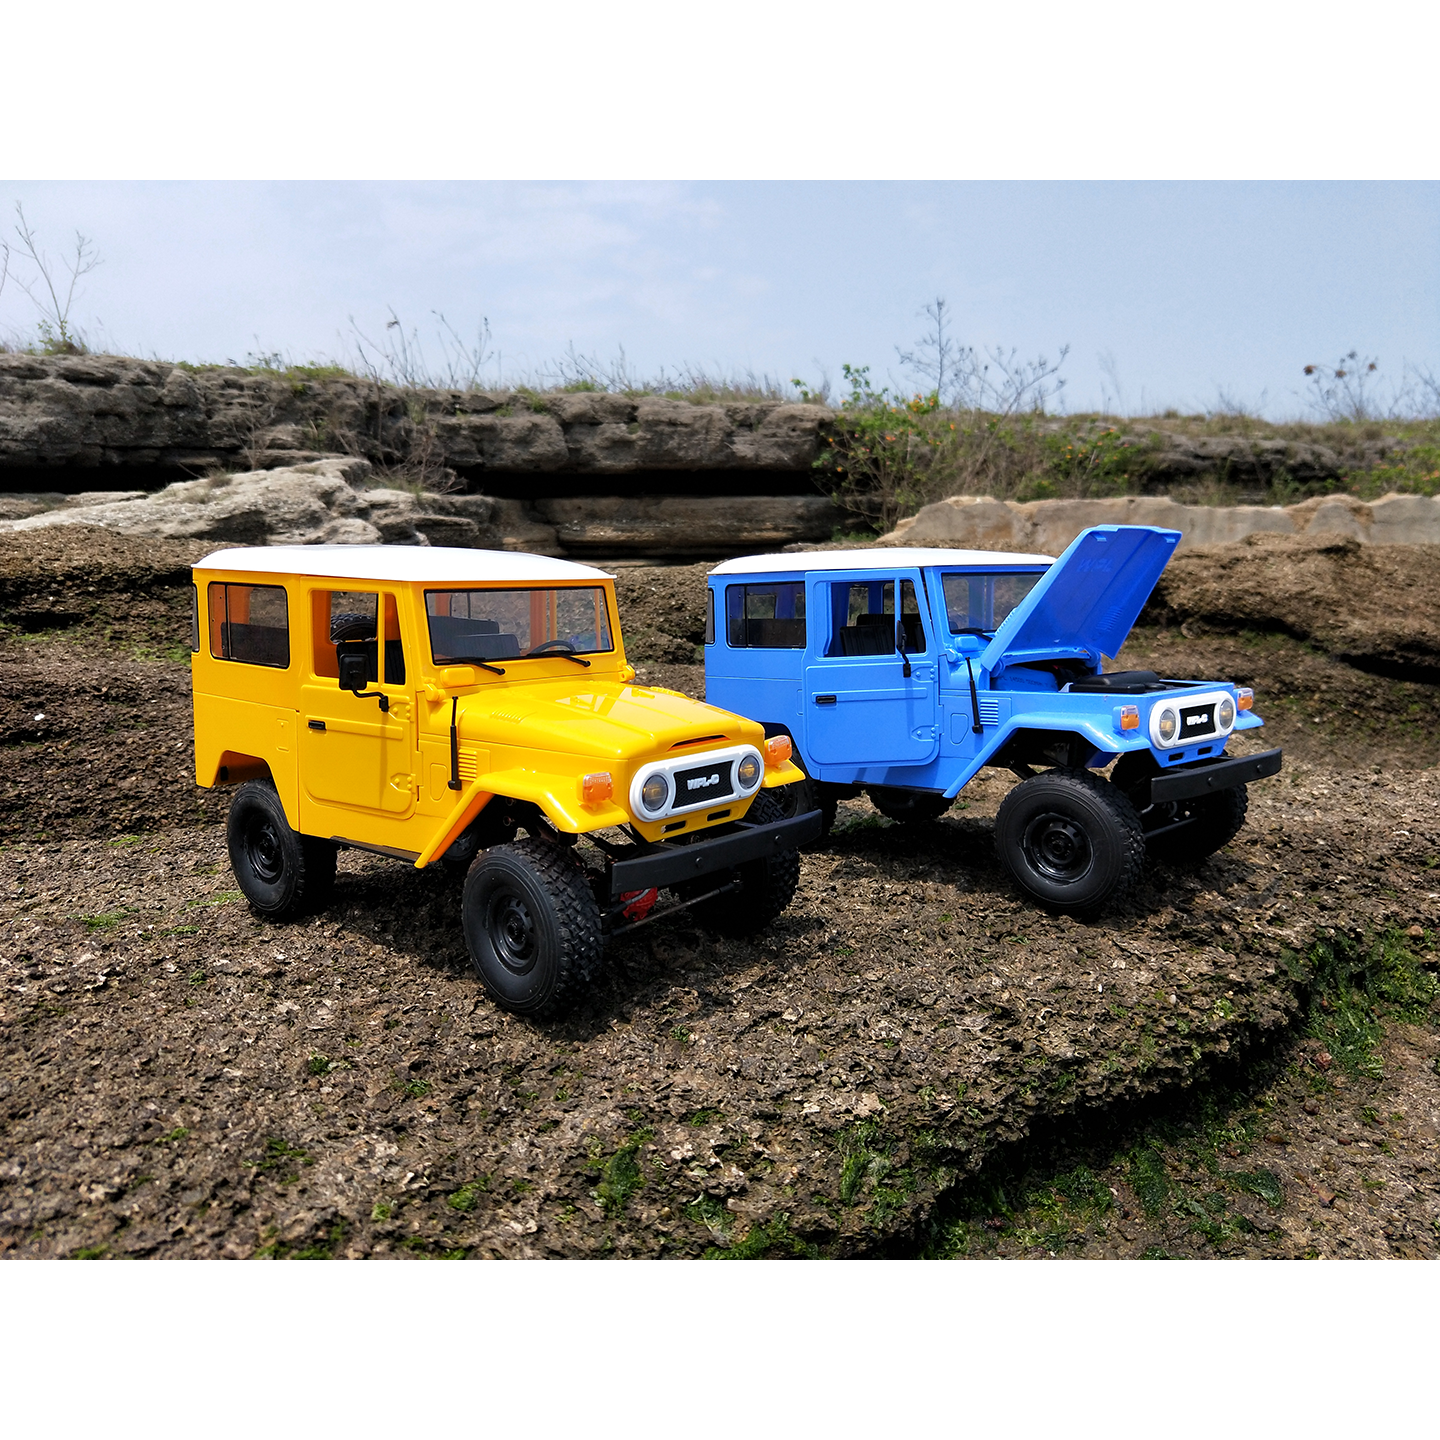 Off Road Racing Series Radio Controlled Collectible Model 1:16 Military Truck FJ C-34